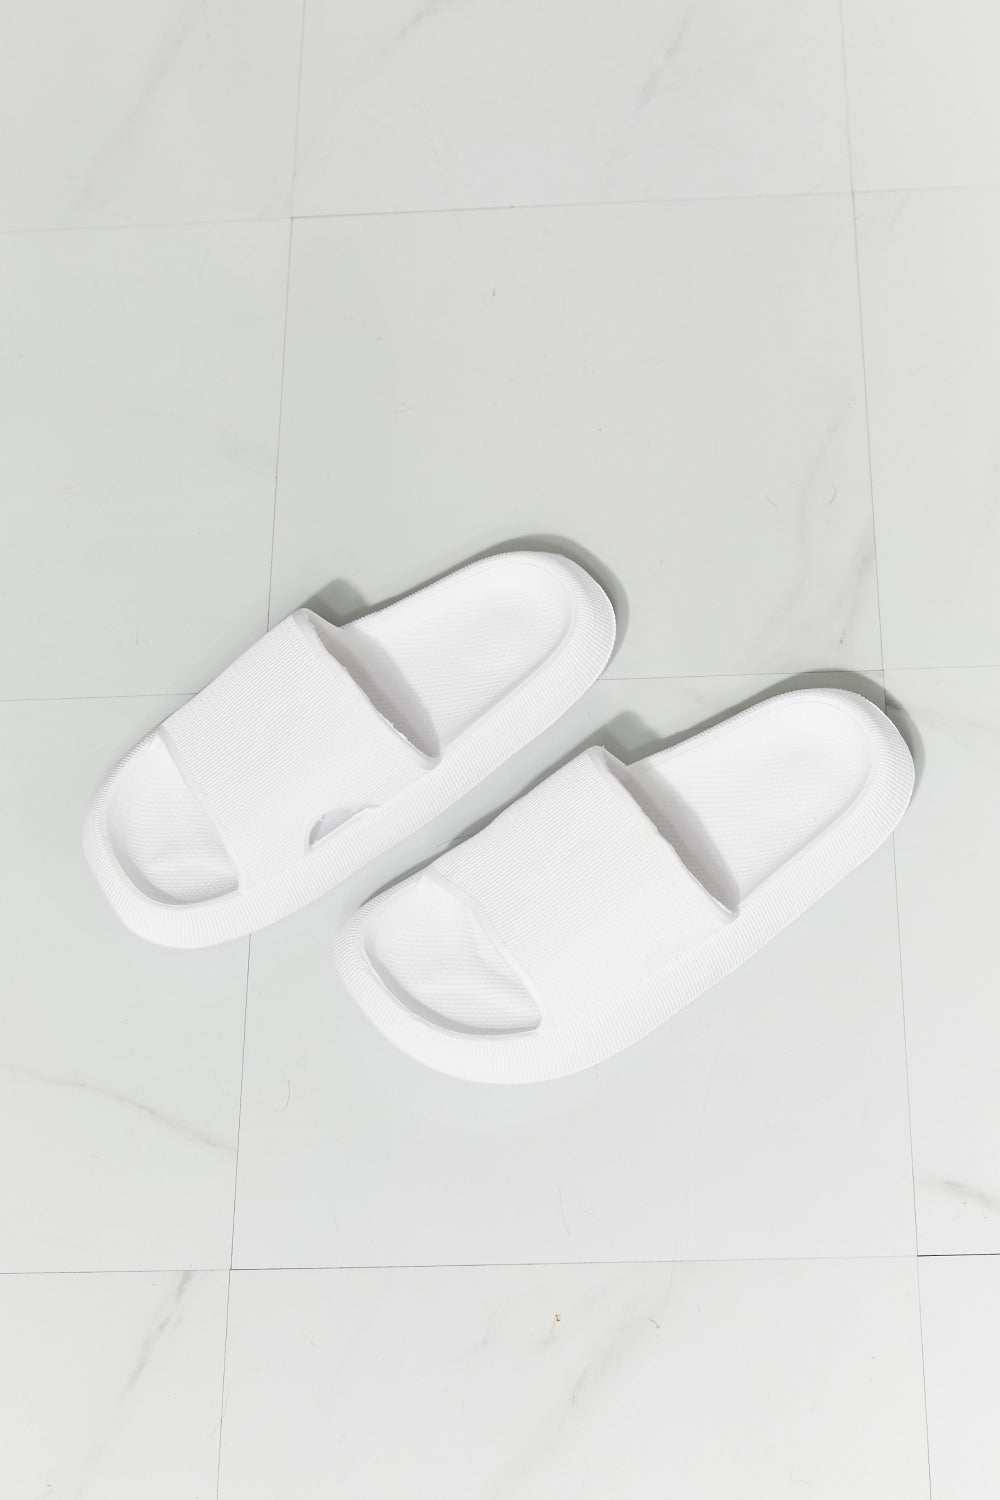 MMShoes Arms Around Me Open Toe Slide in White - Cheeky Chic Boutique